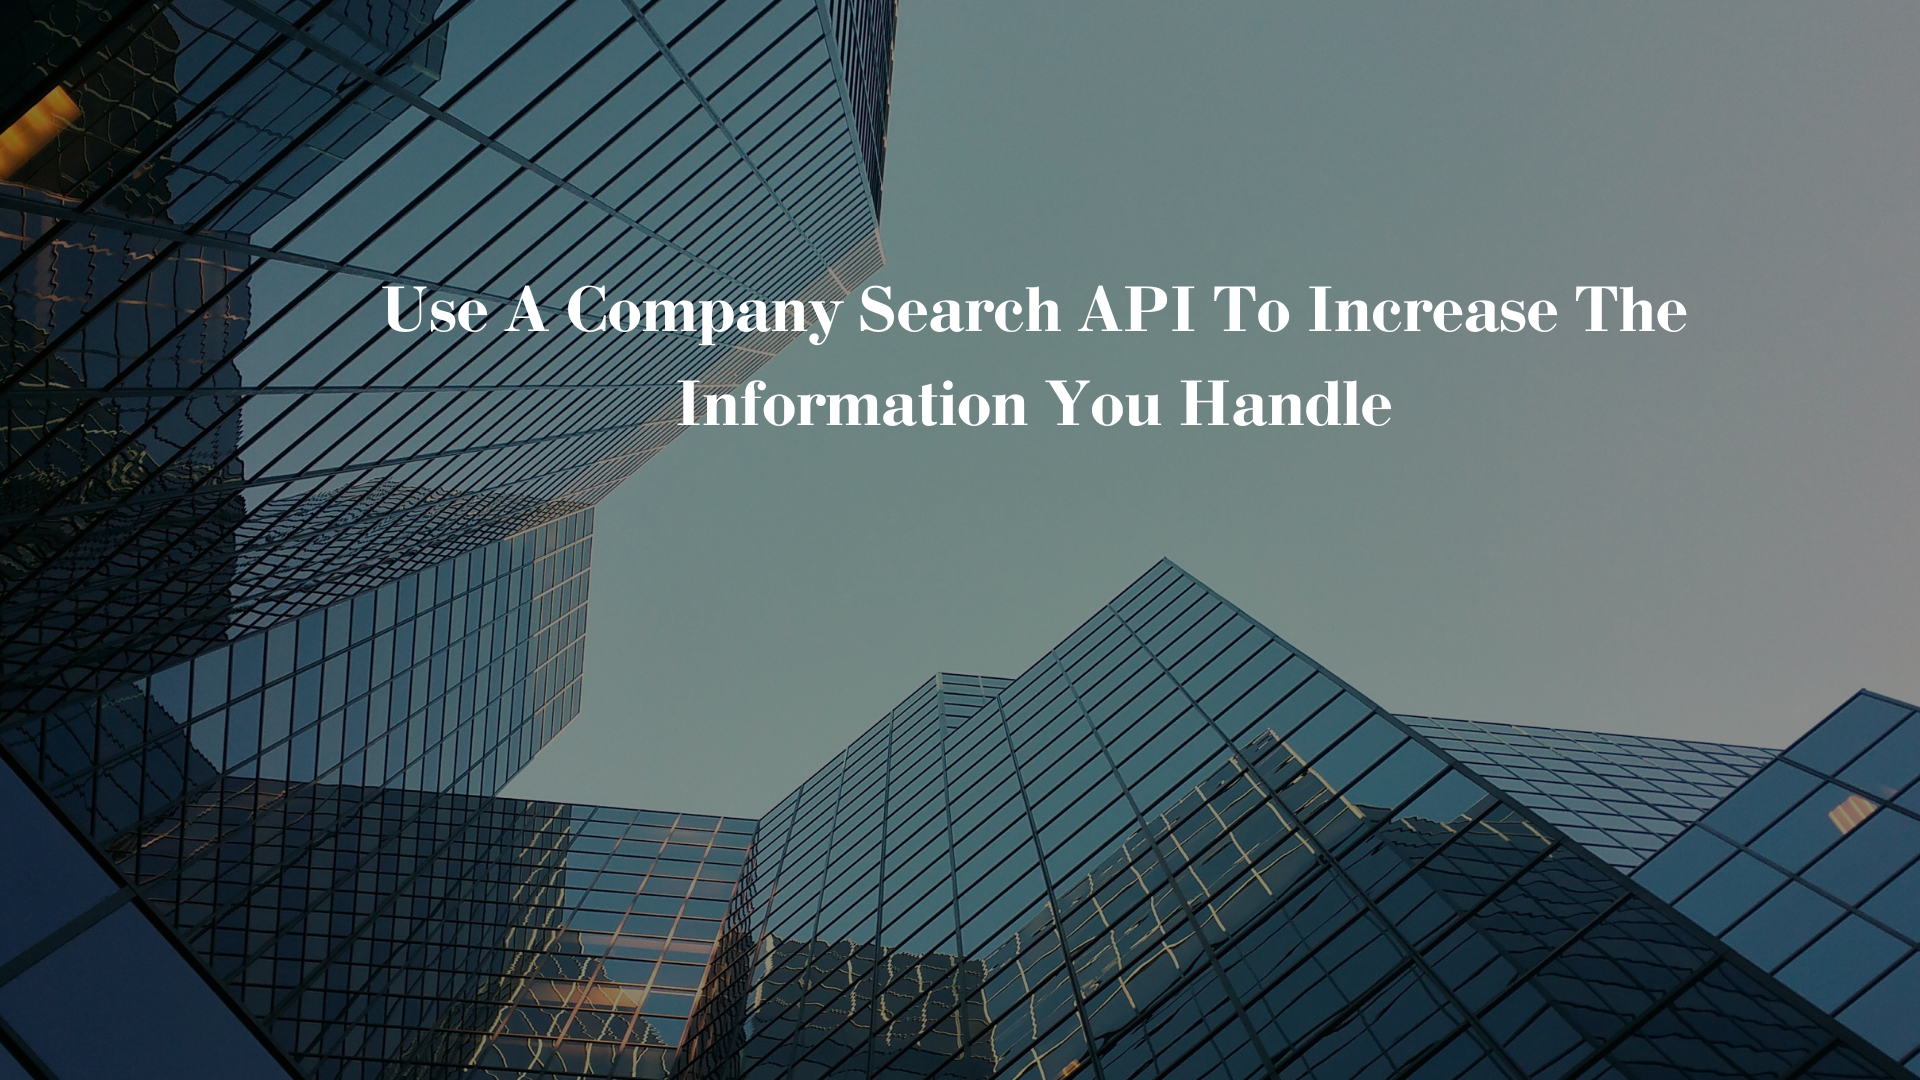 Use A Company Search API To Increase The Information You Handle